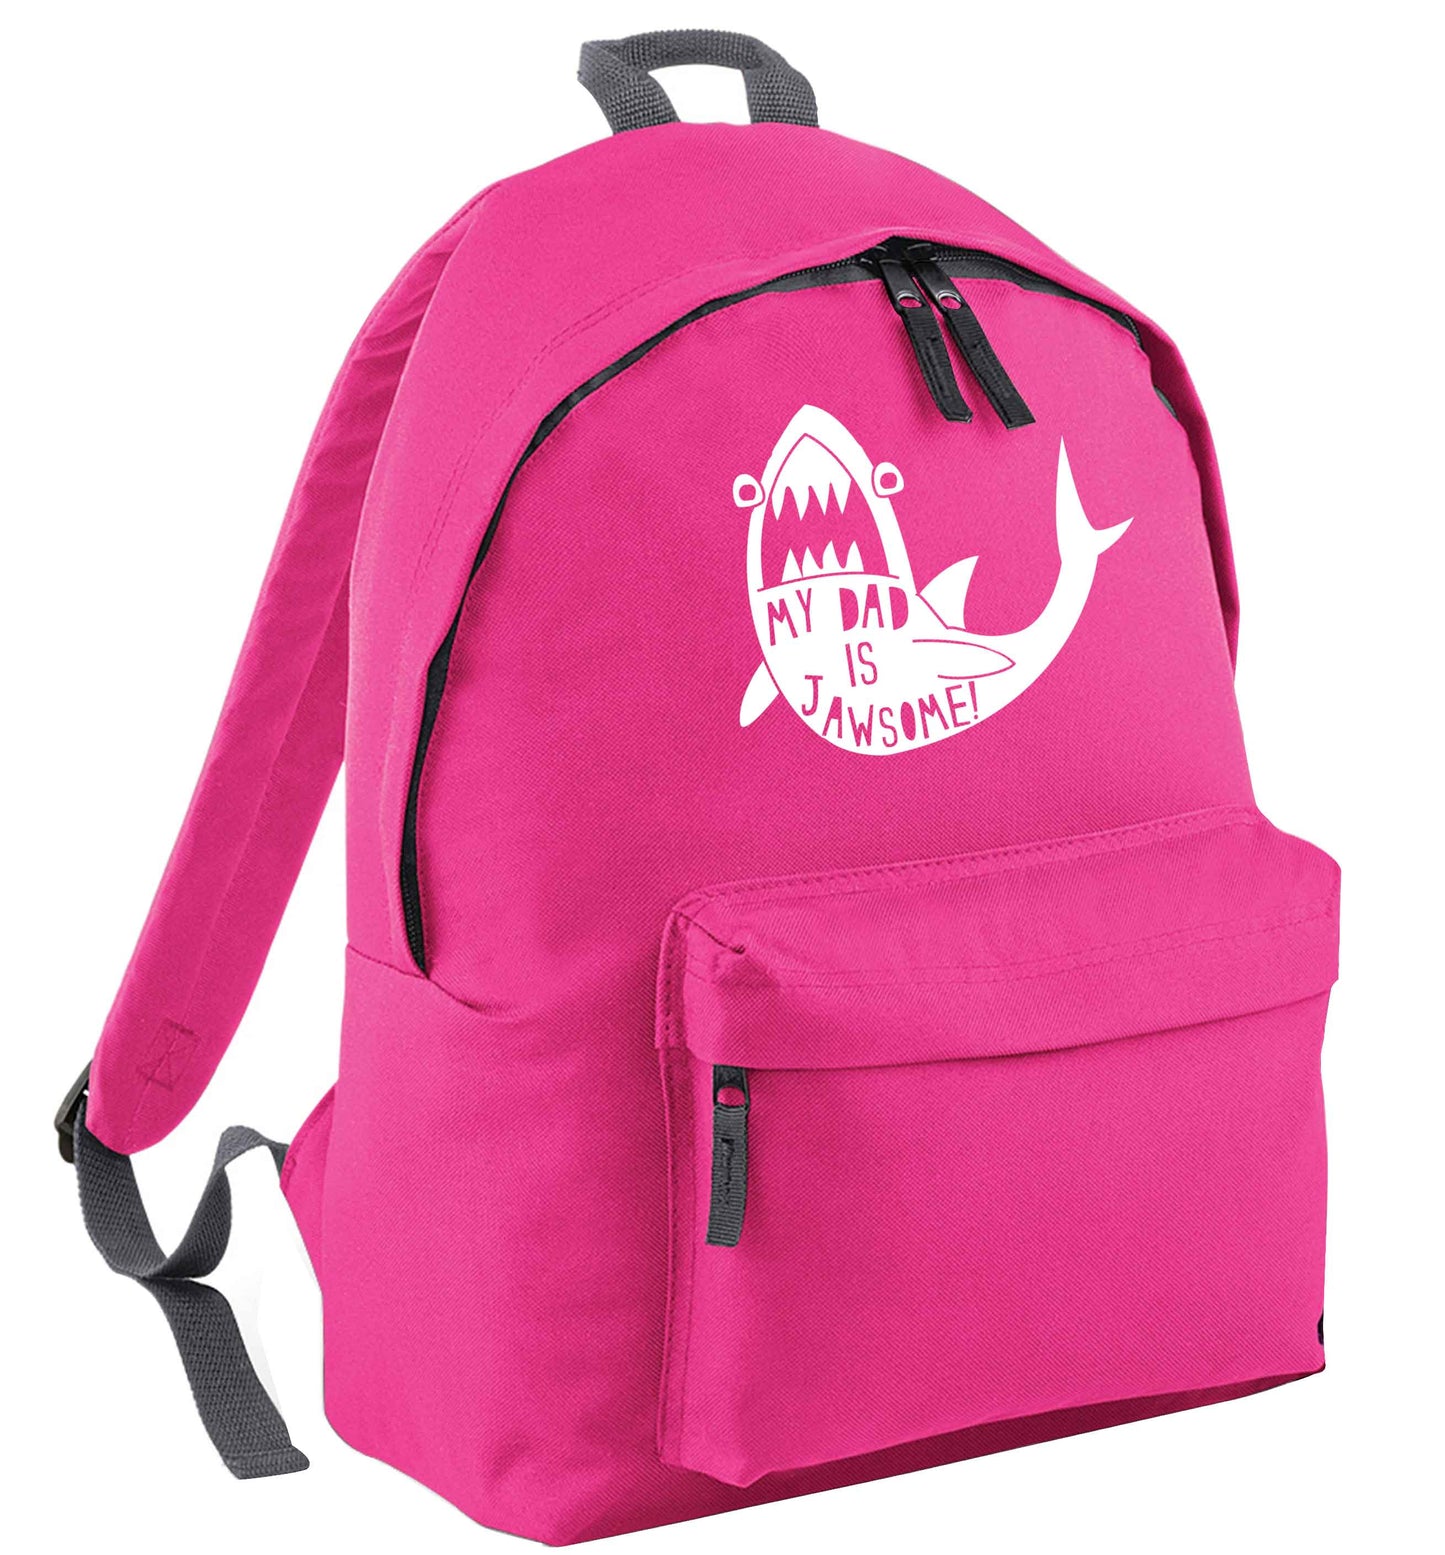 My Dad is jawsome pink adults backpack